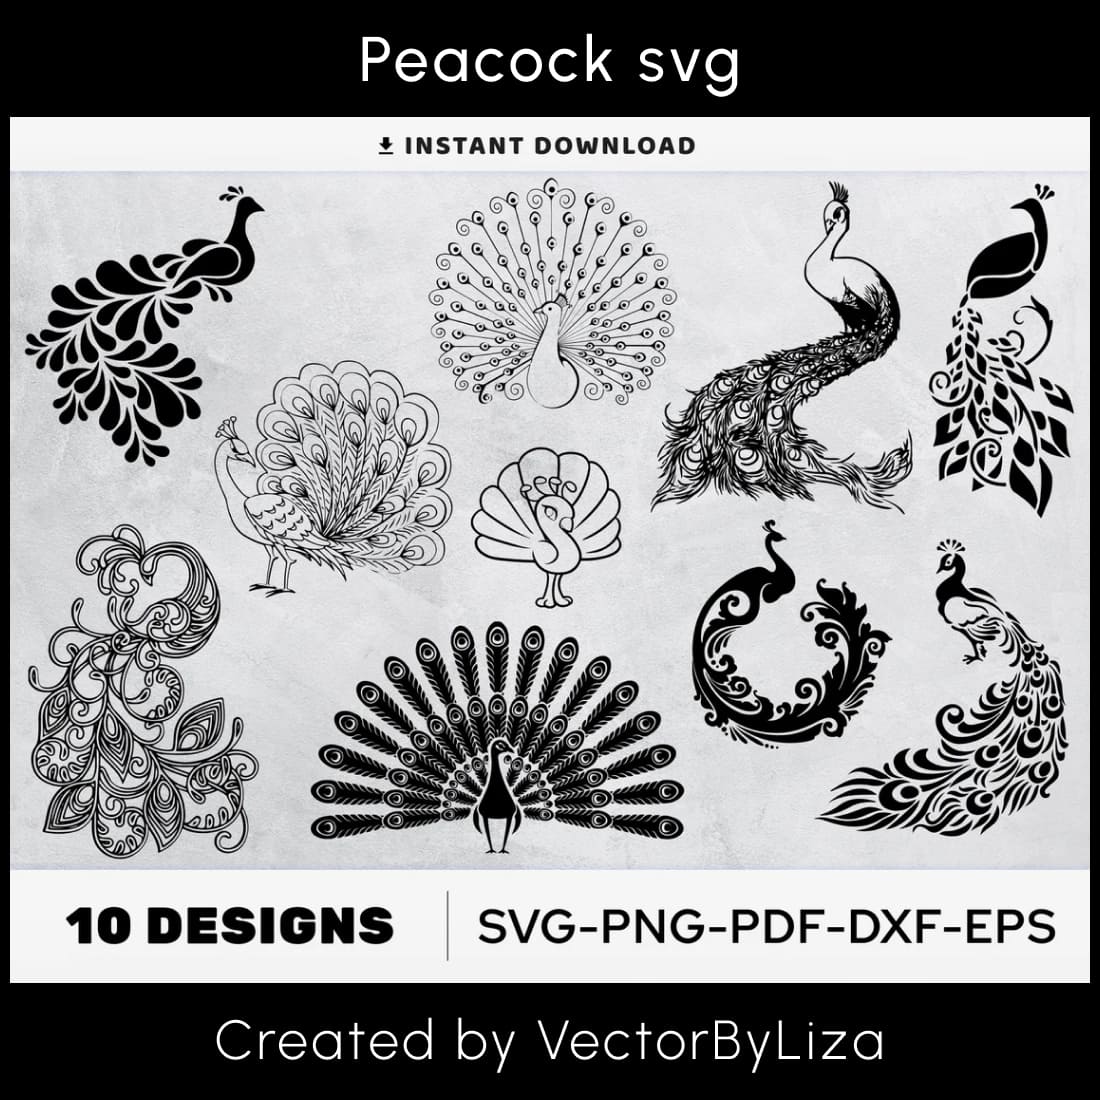 peacock svg peacock clipart cover